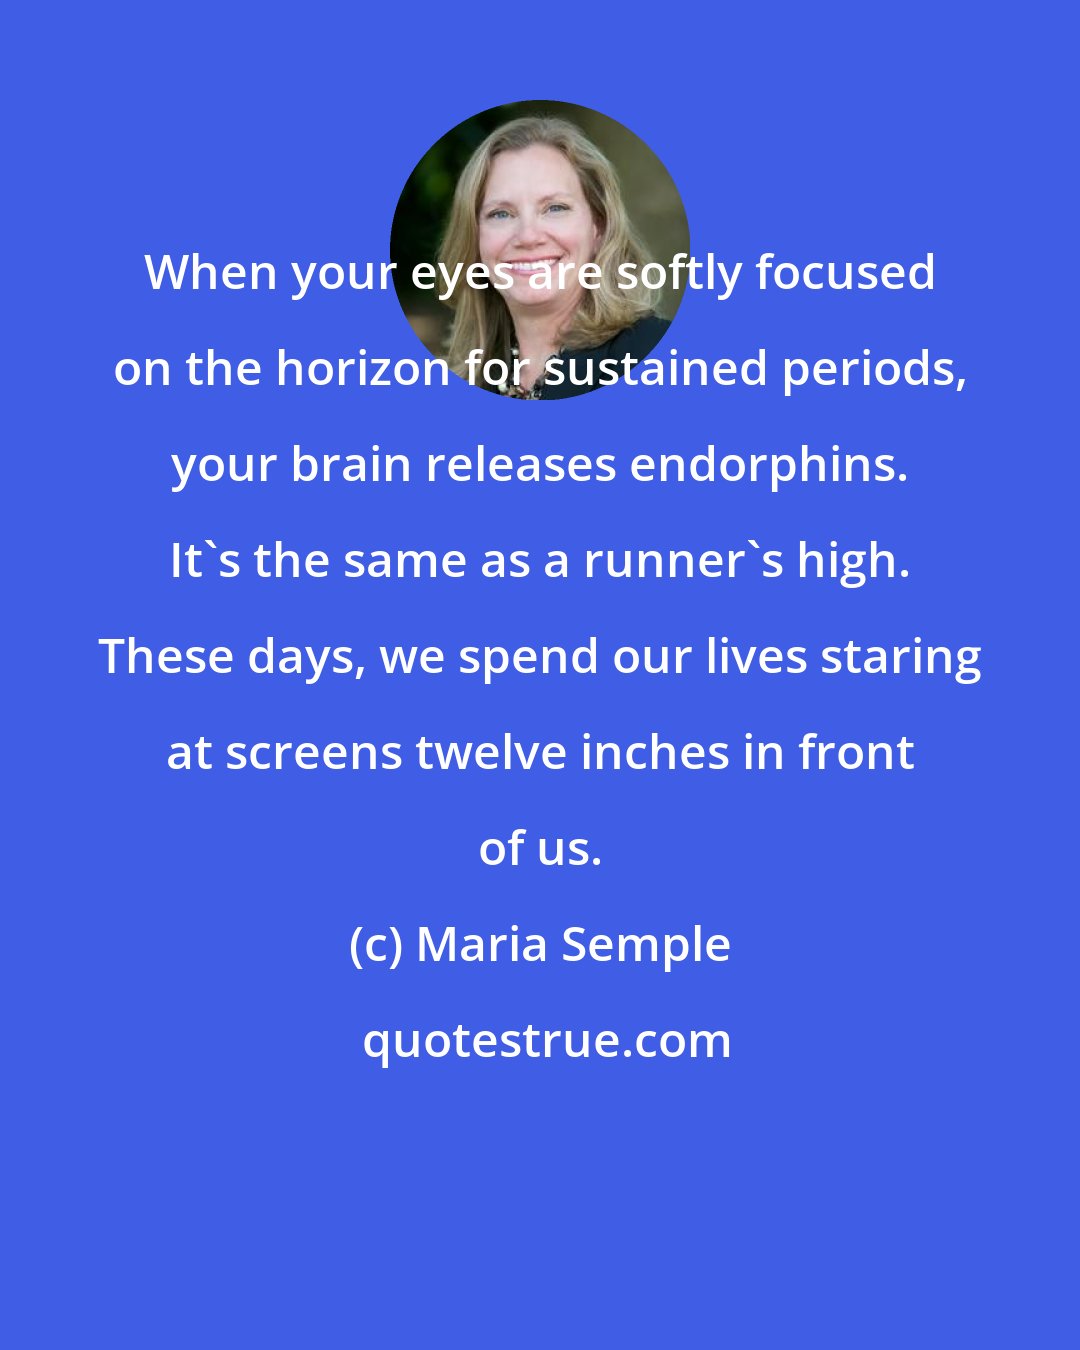 Maria Semple: When your eyes are softly focused on the horizon for sustained periods, your brain releases endorphins. It's the same as a runner's high. These days, we spend our lives staring at screens twelve inches in front of us.